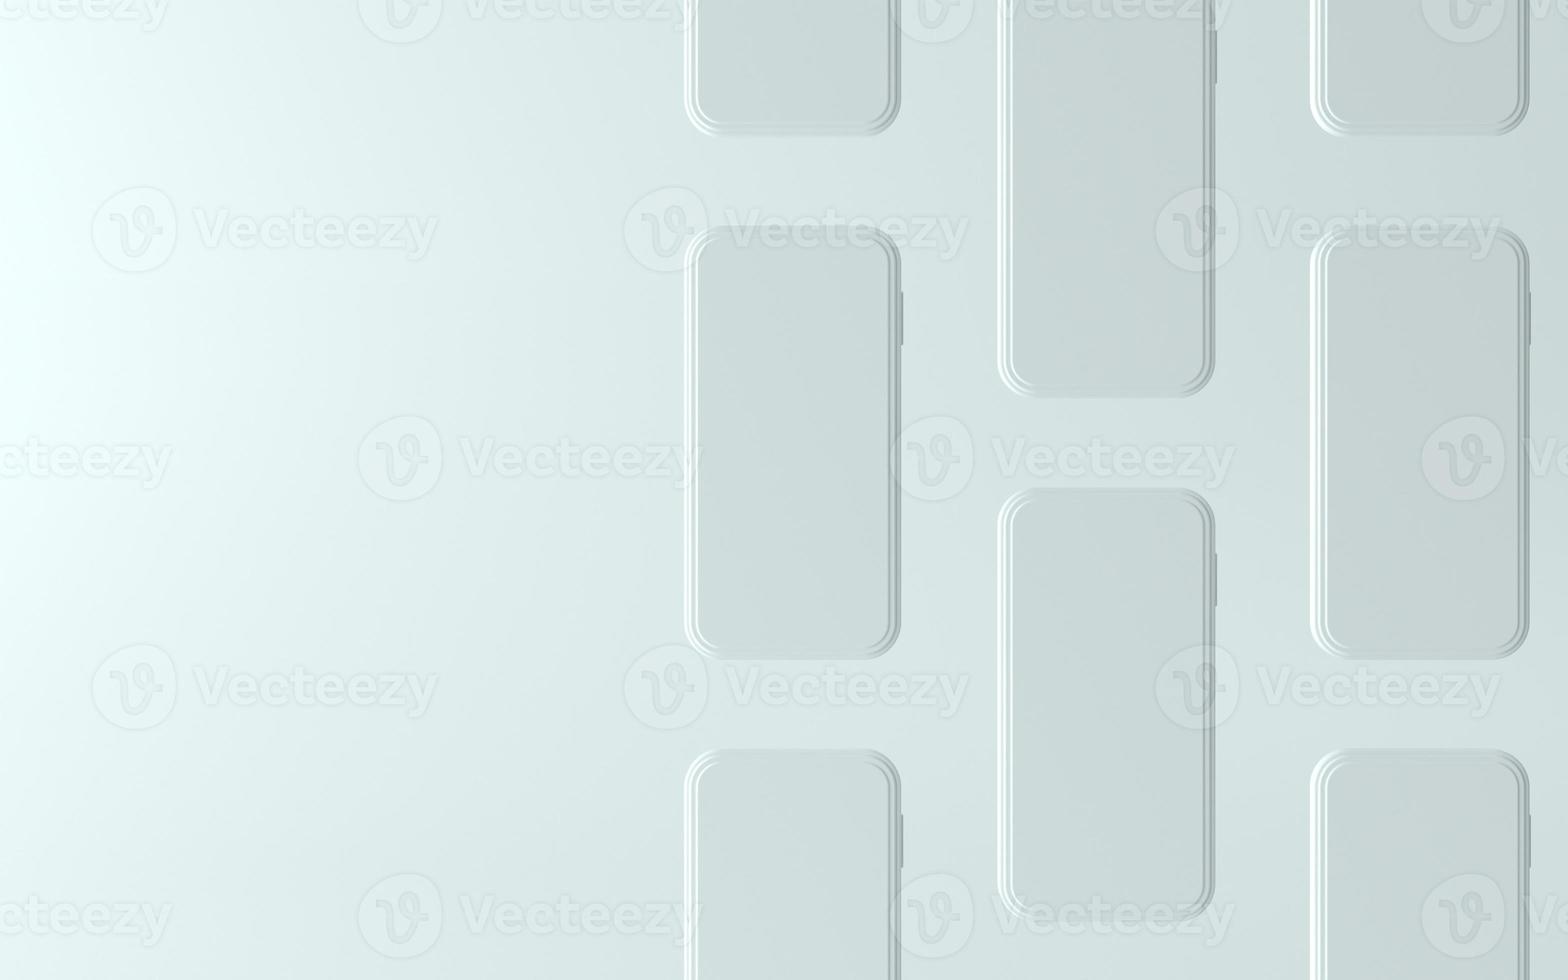 3D white phone illustration with blank screen photo